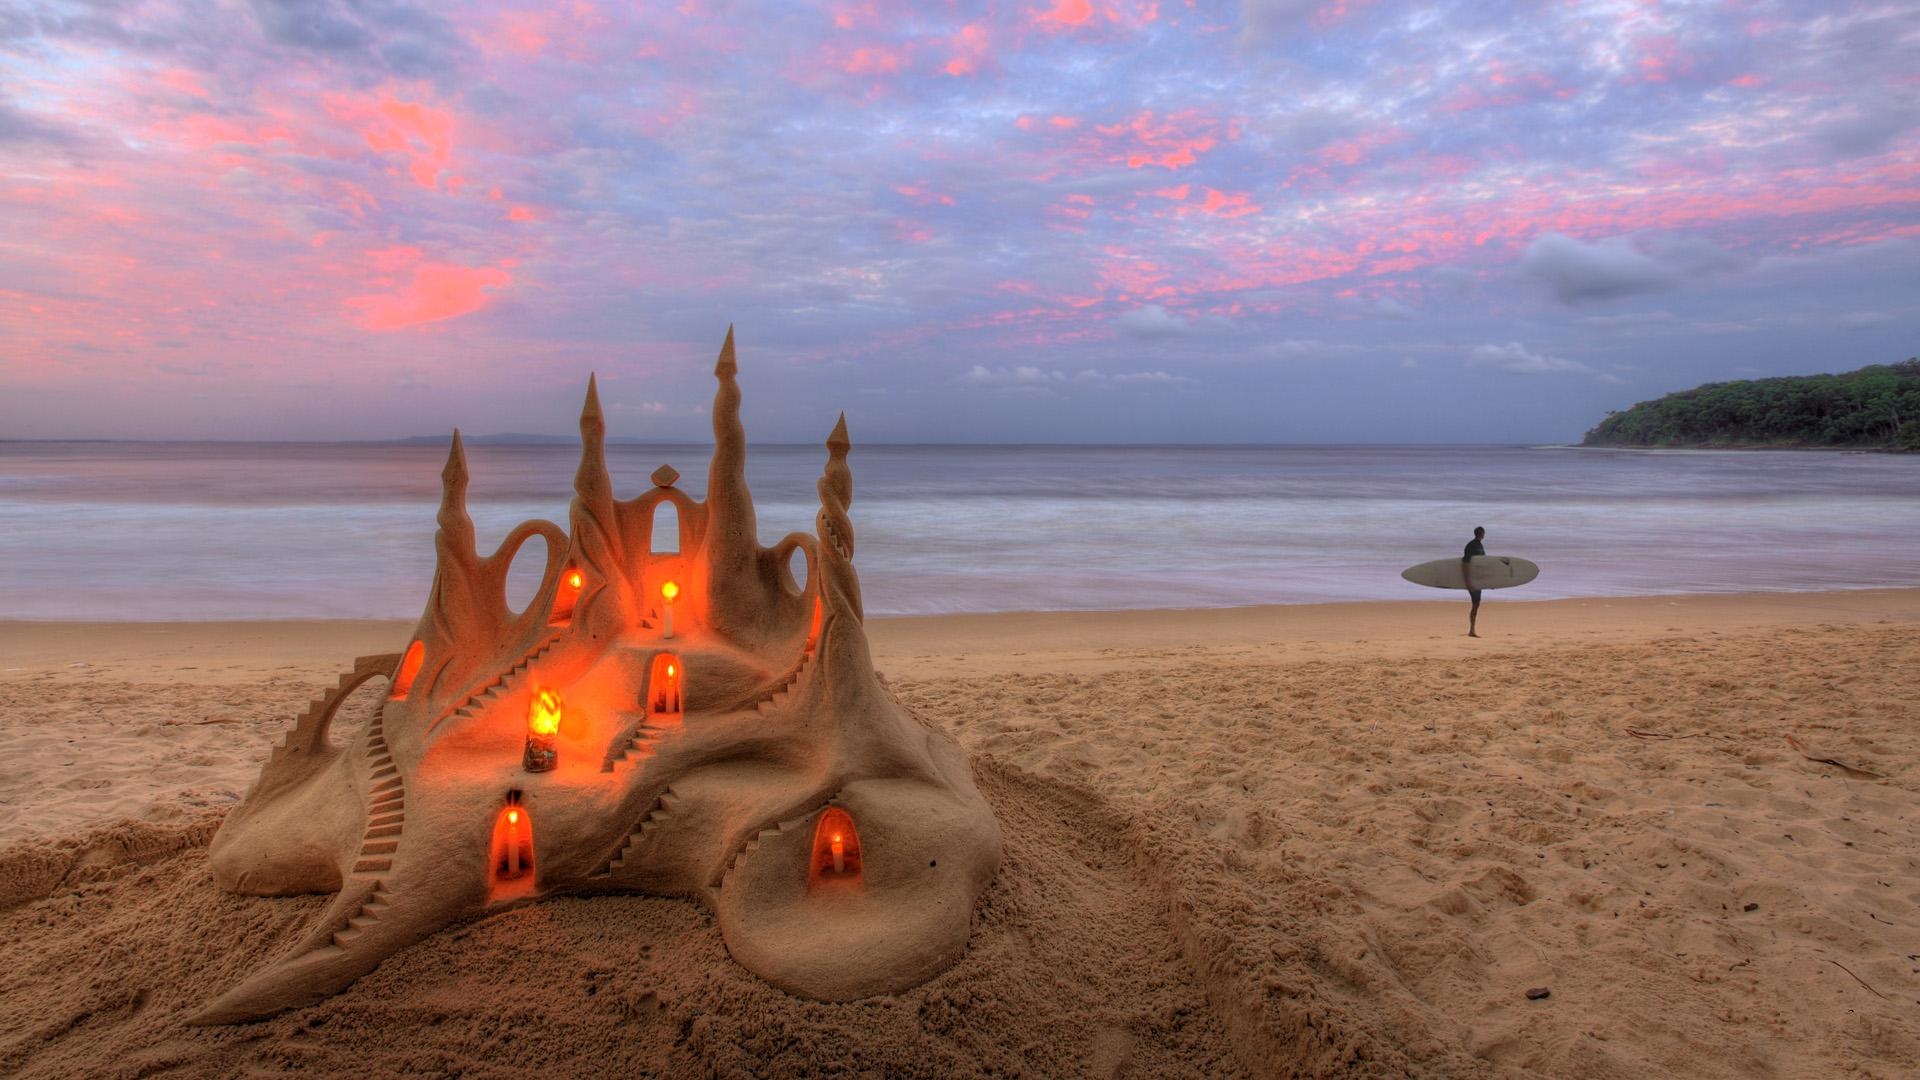 Candles In Sand Castle Wallpapers   1920x1080   467326